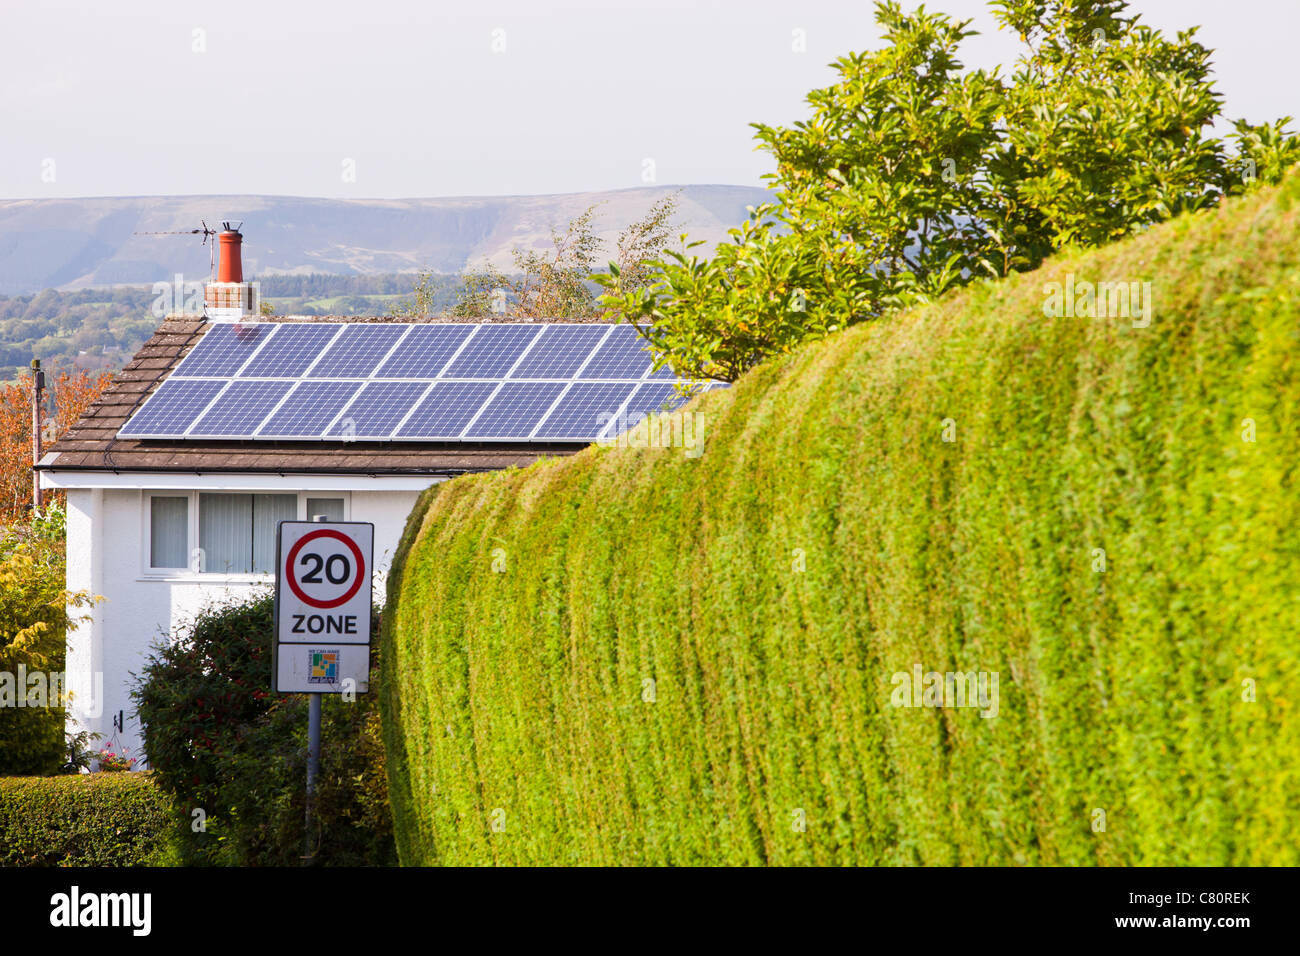 Solar electric panels on a house roof in clitheroe, Lancashire, UK. Stock Photo